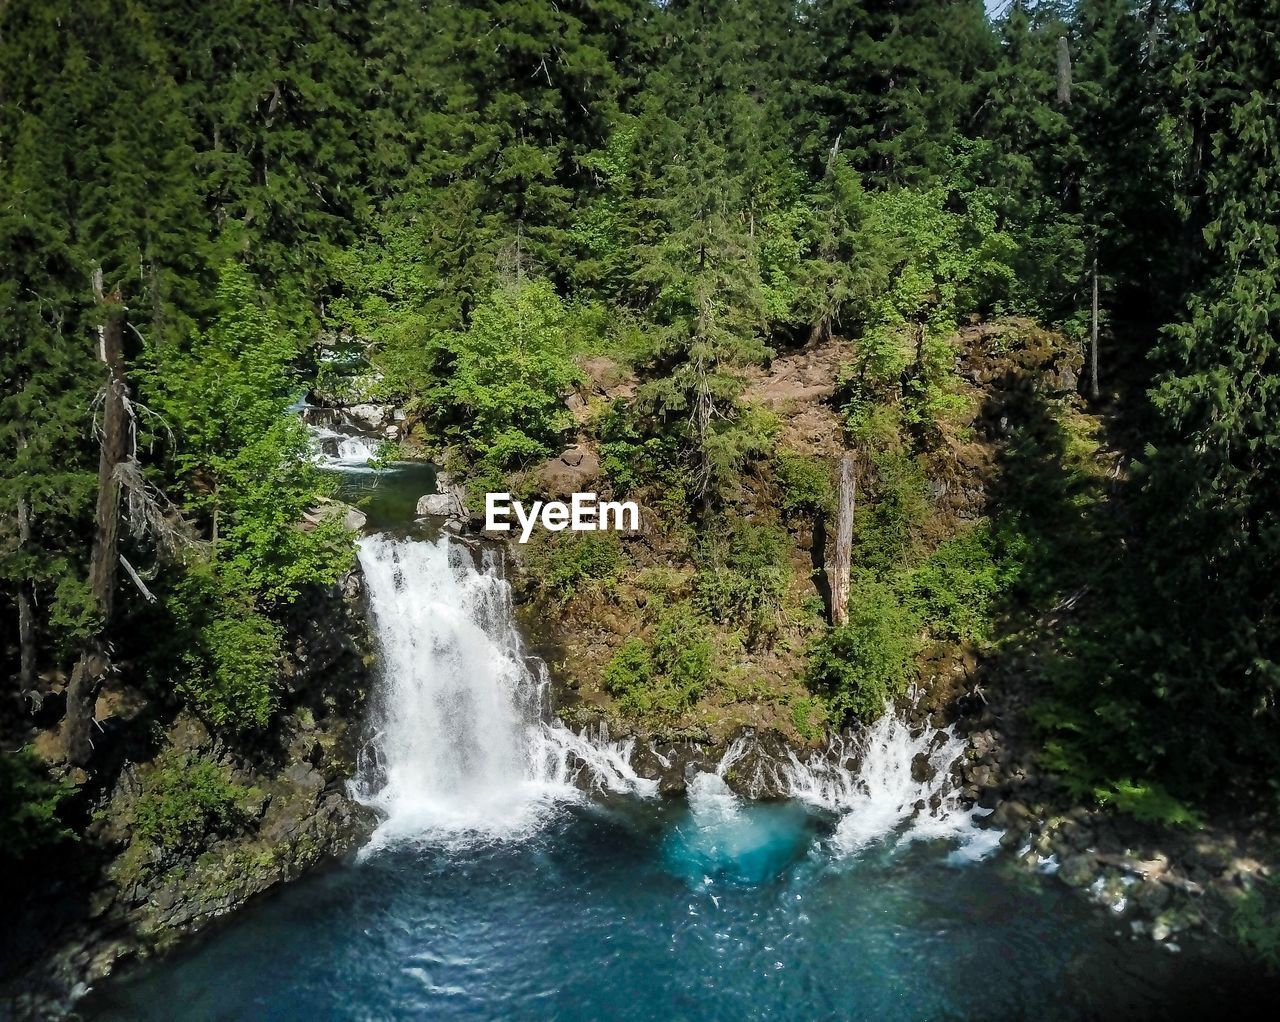 SCENIC VIEW OF WATERFALL AMIDST TREES